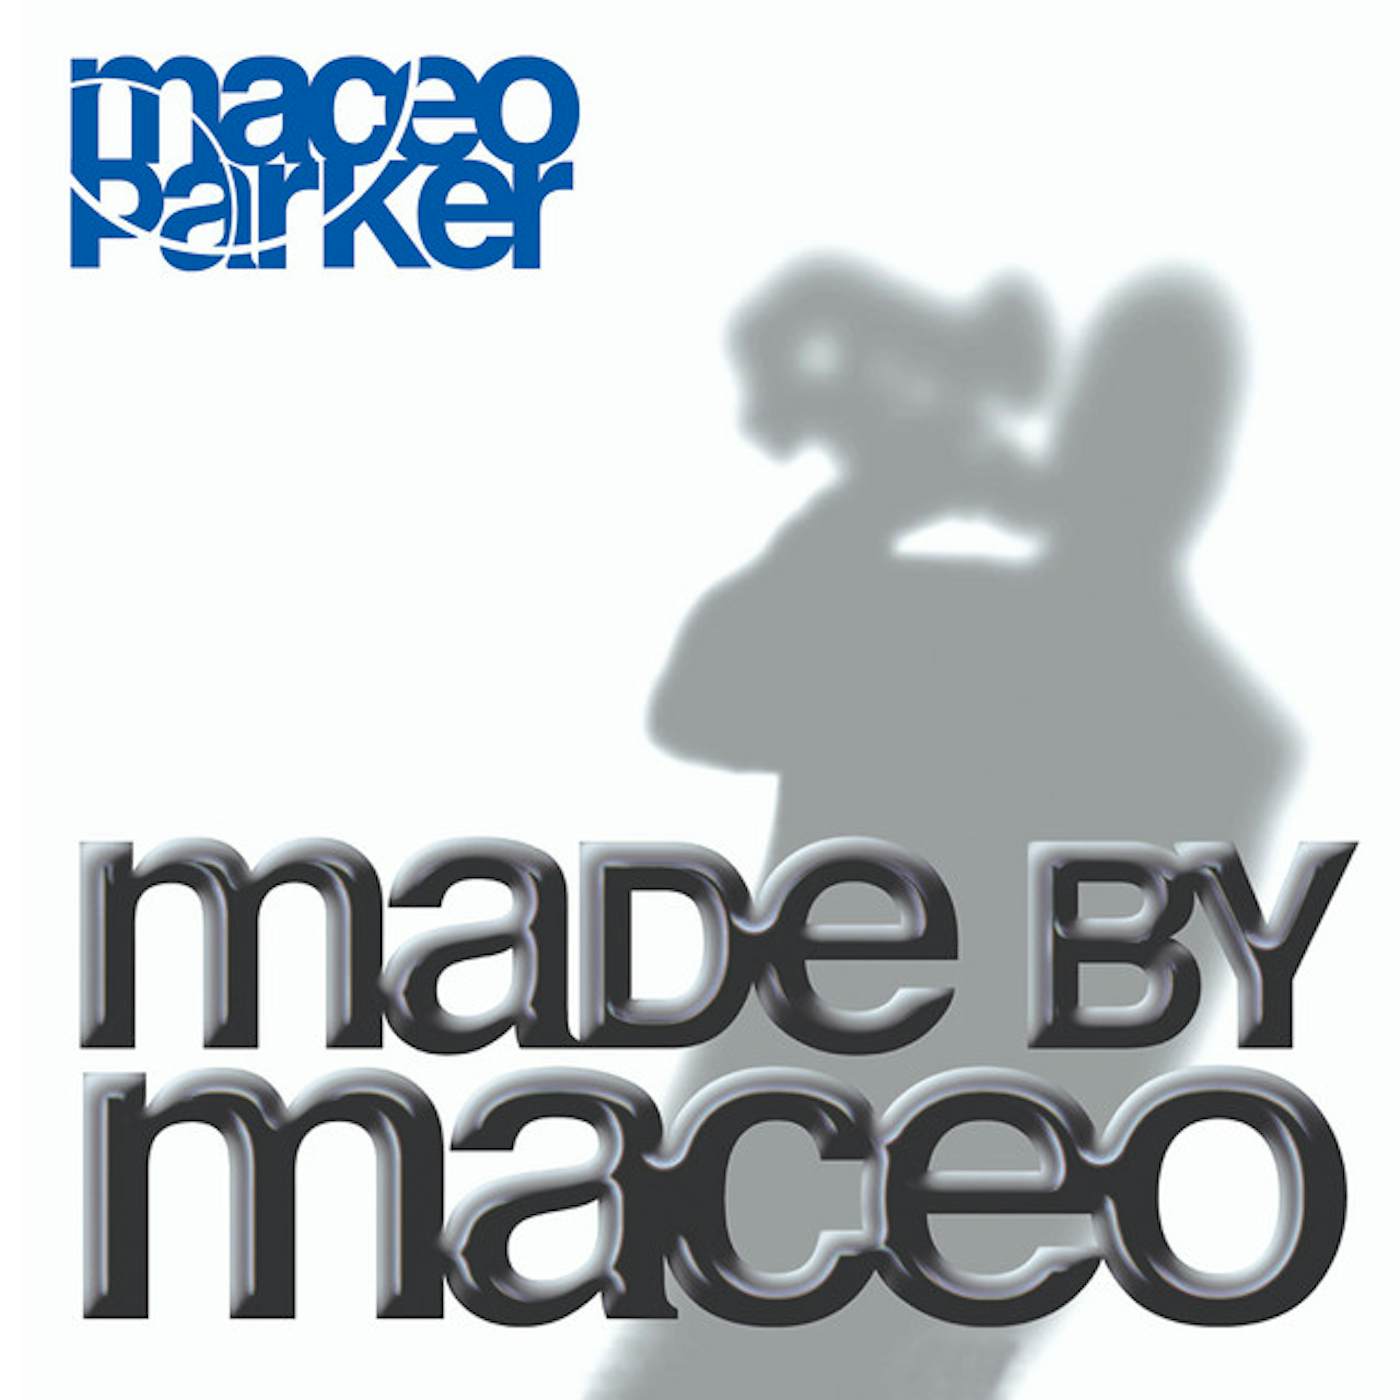 Maceo Parker MADE BY MACEO CD